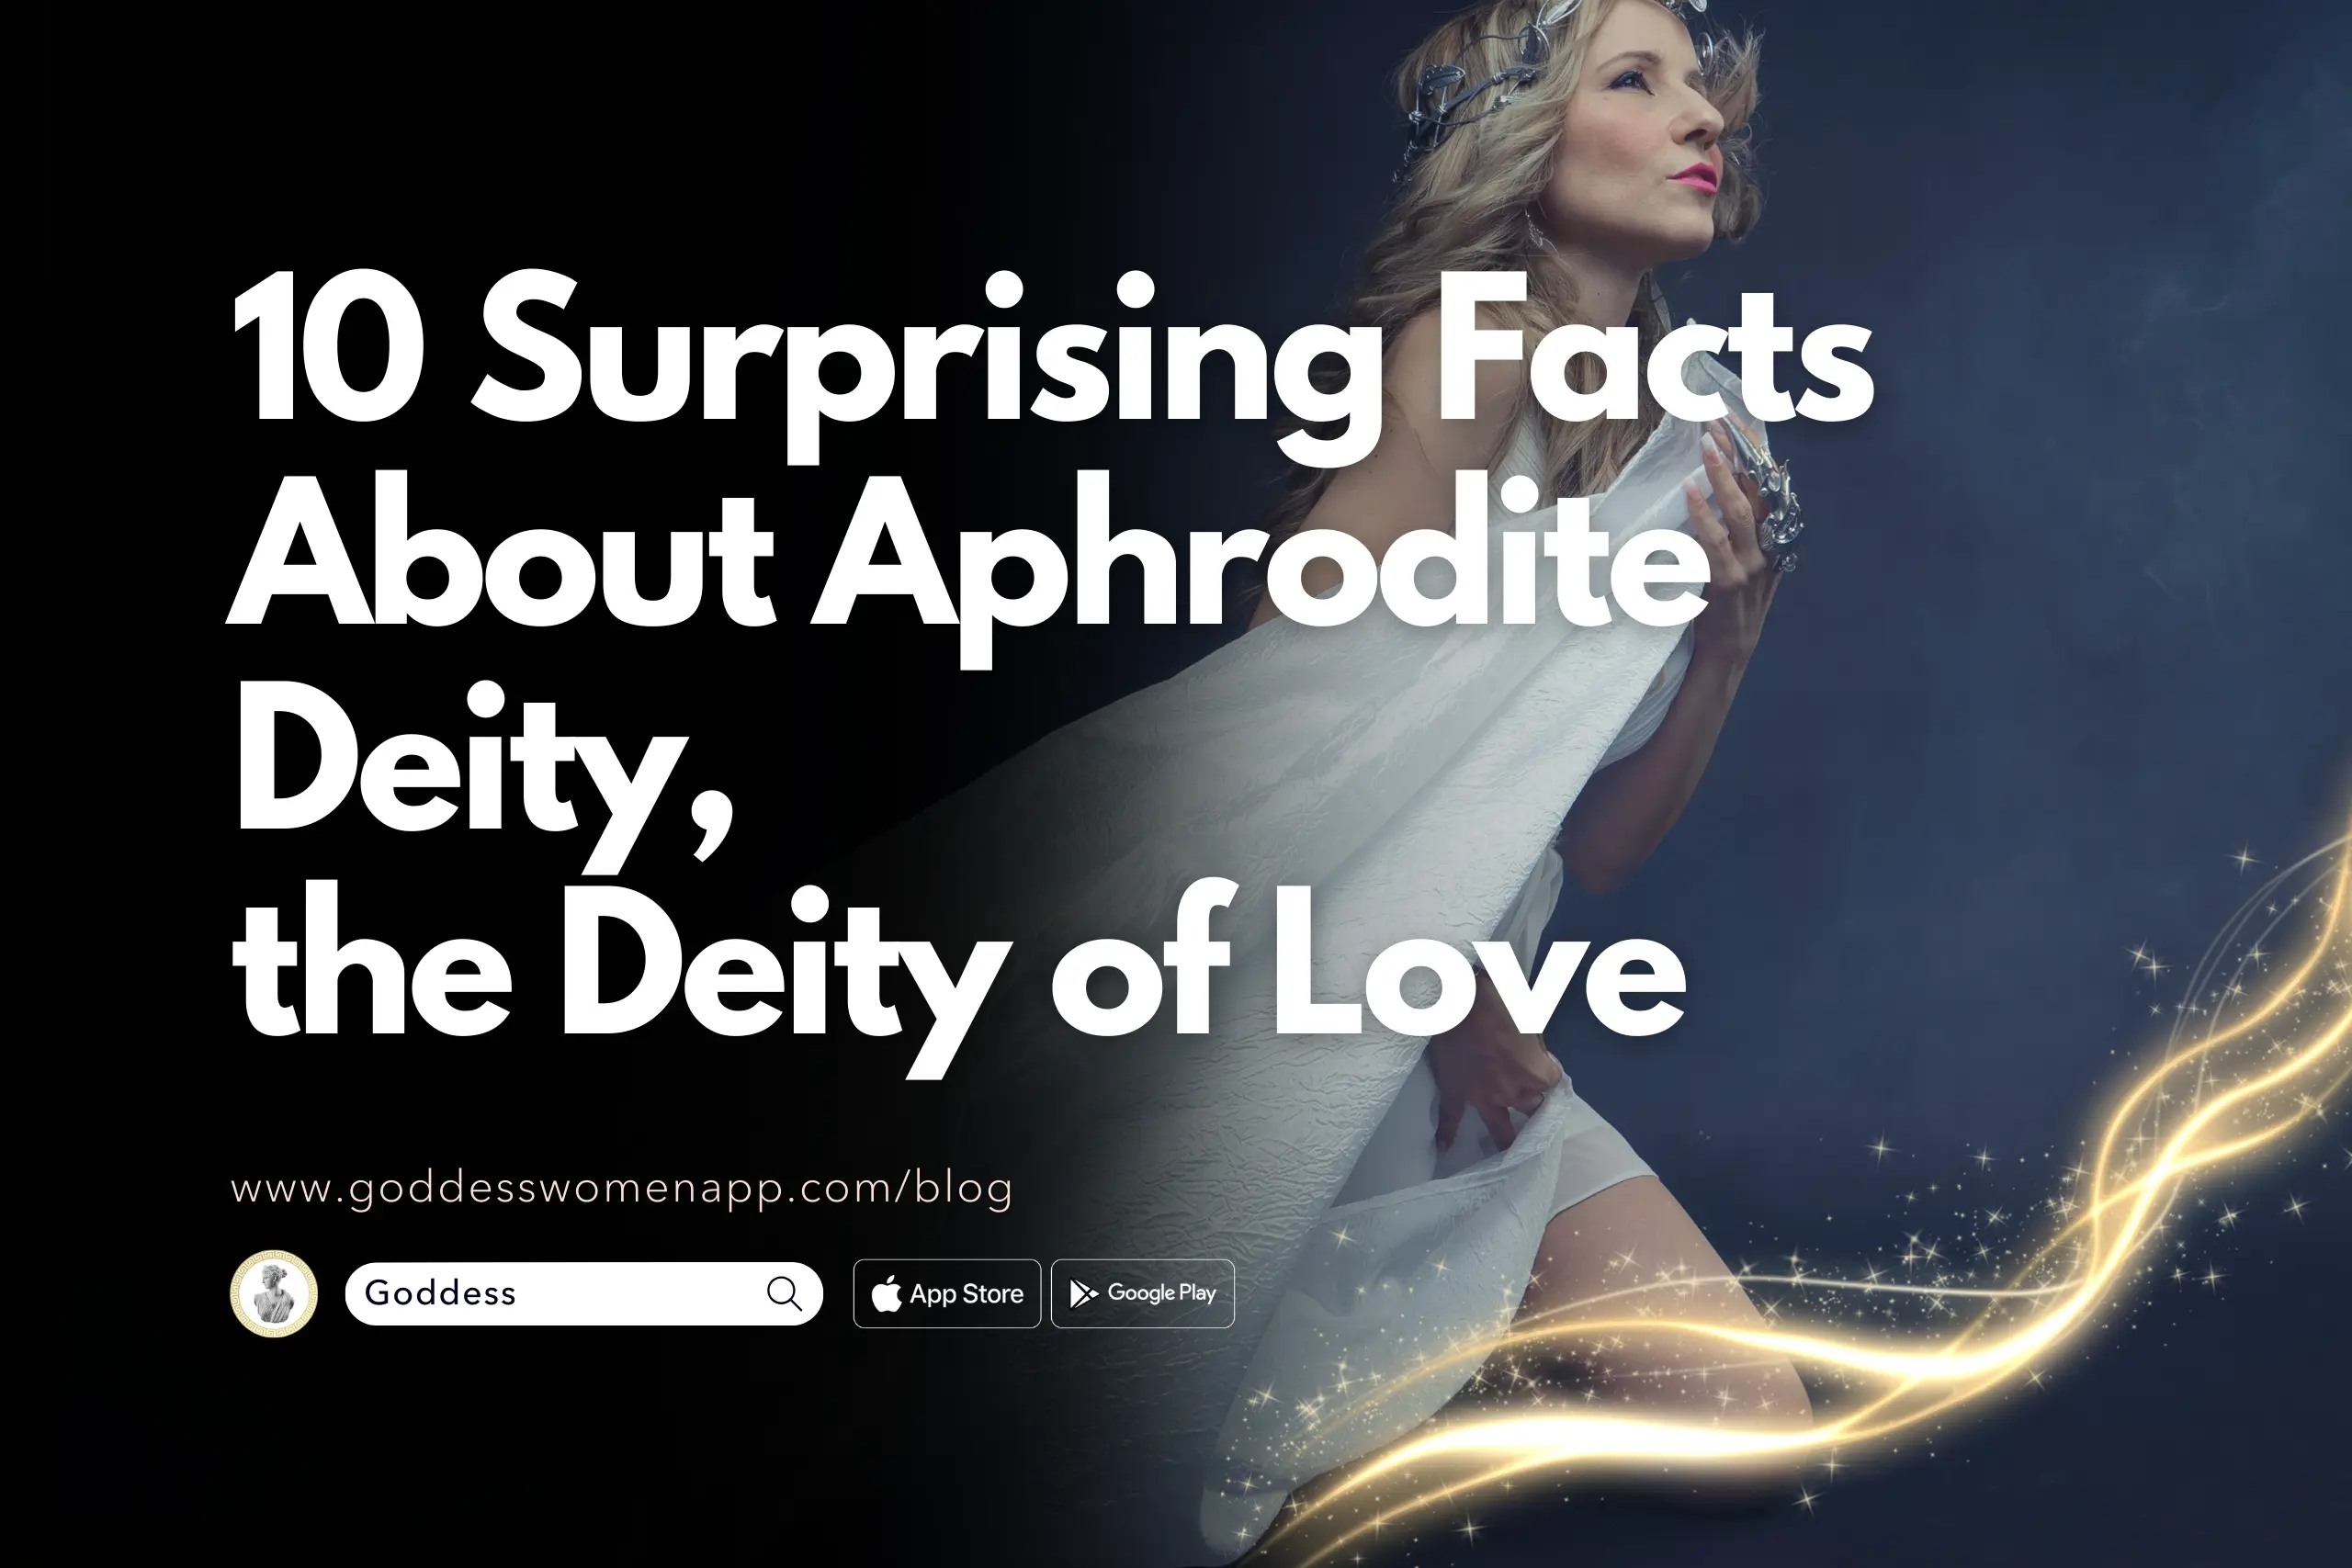 10 Surprising Facts About Aphrodite Deity, the Deity of Love